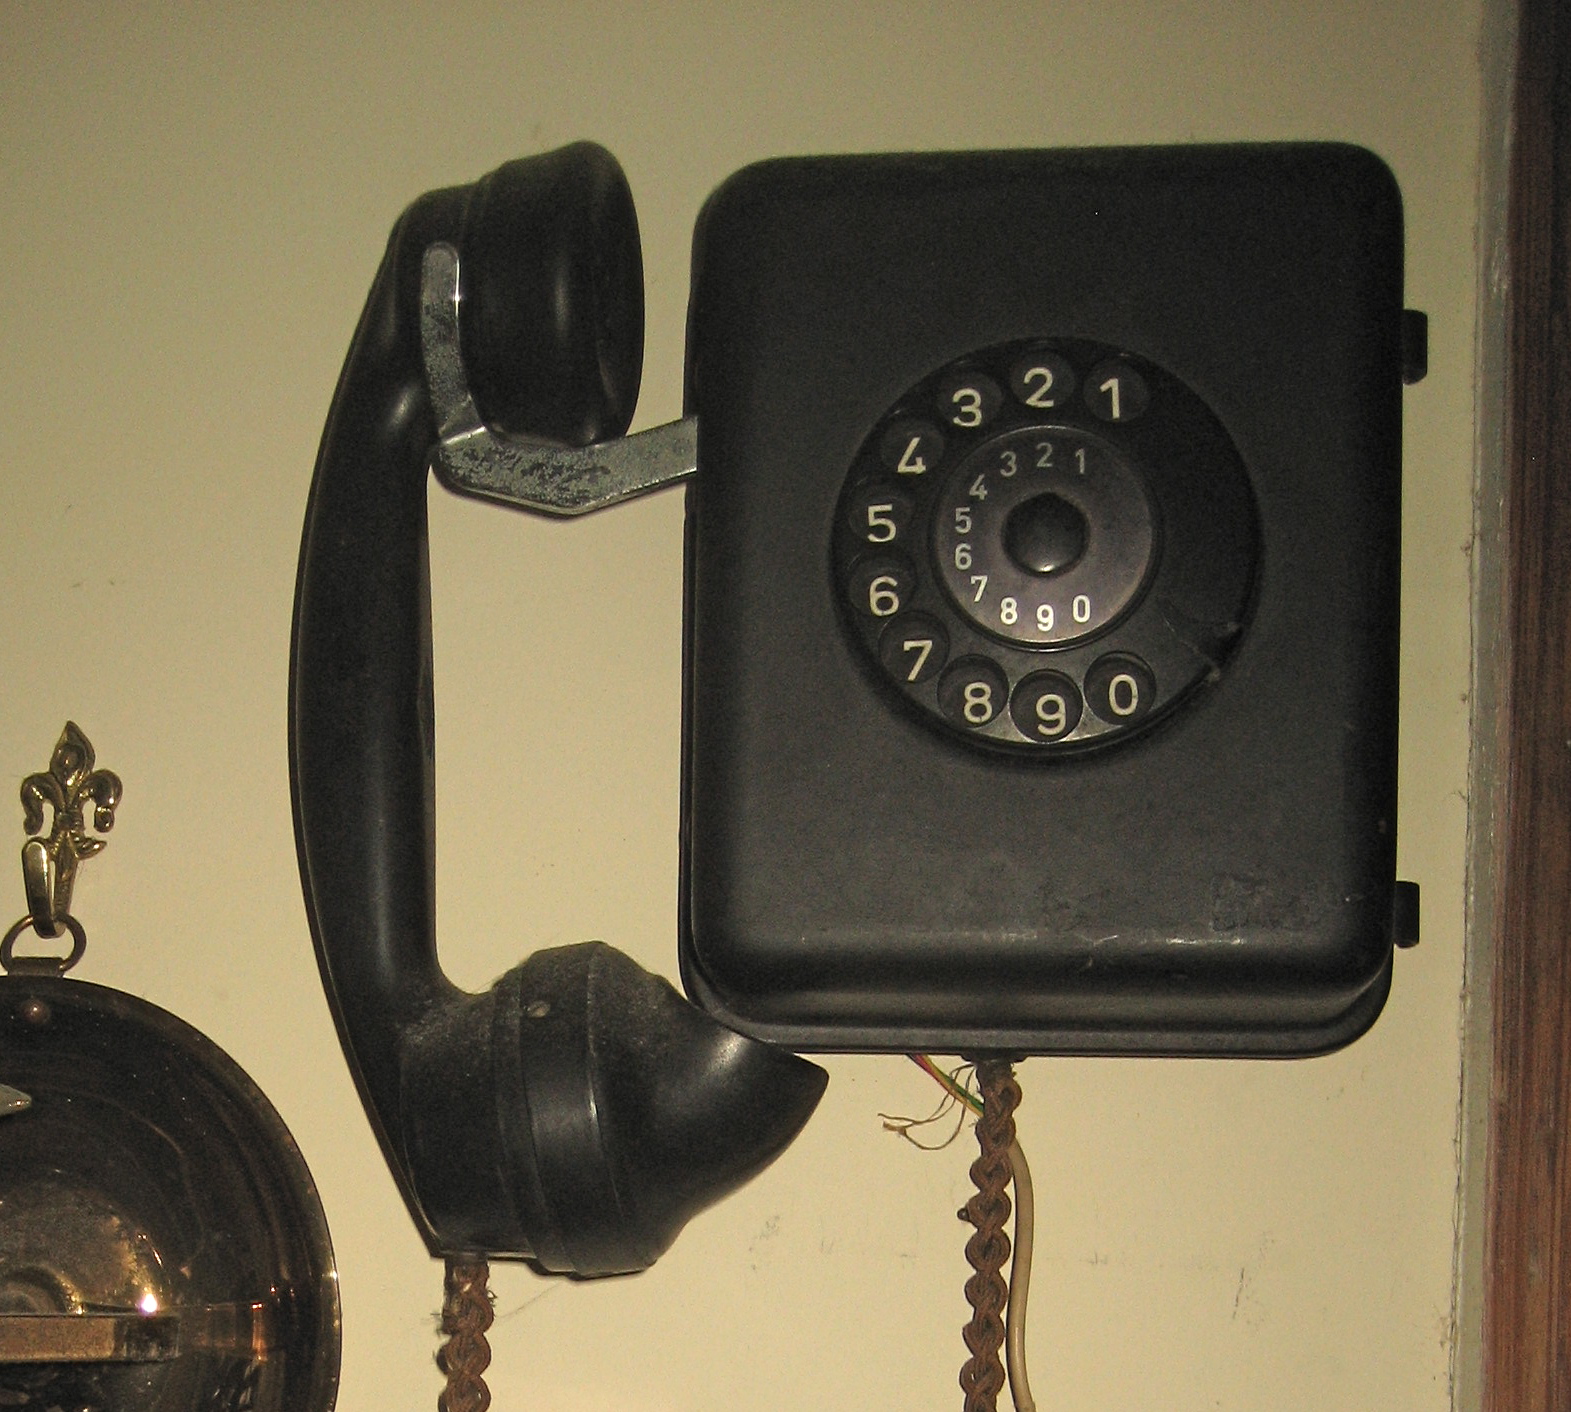 an old fashioned telephone on the wall with other old phone and bells